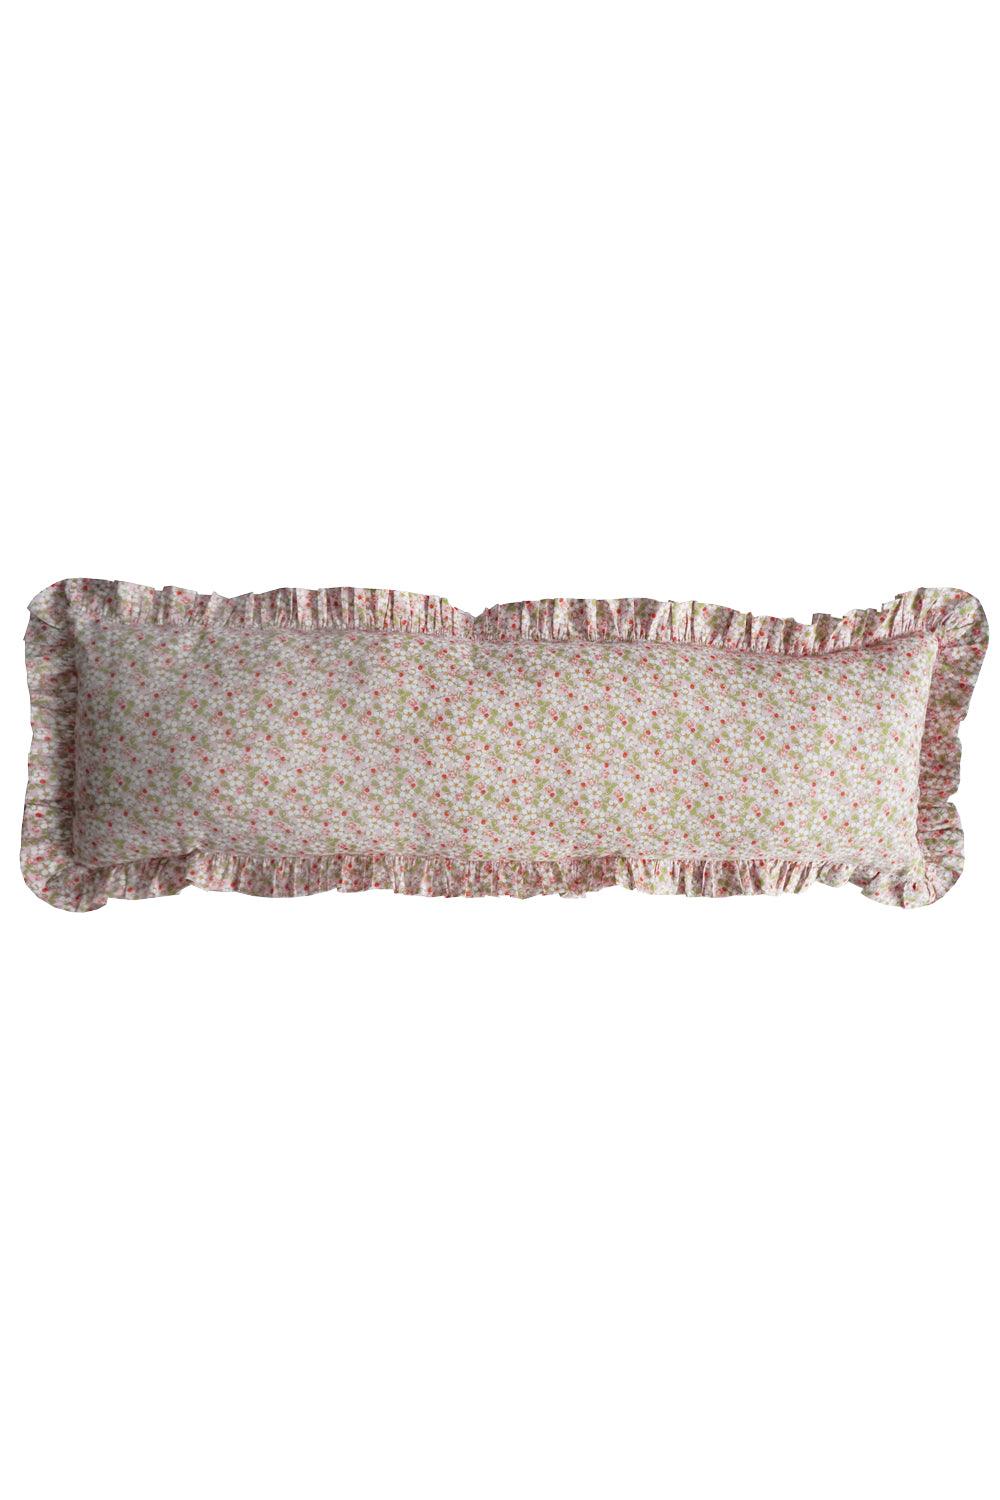 Ruffle Bolster Lumbar Cushion made with Liberty Fabric PAYSANNE BLOSSOM - Coco & Wolf